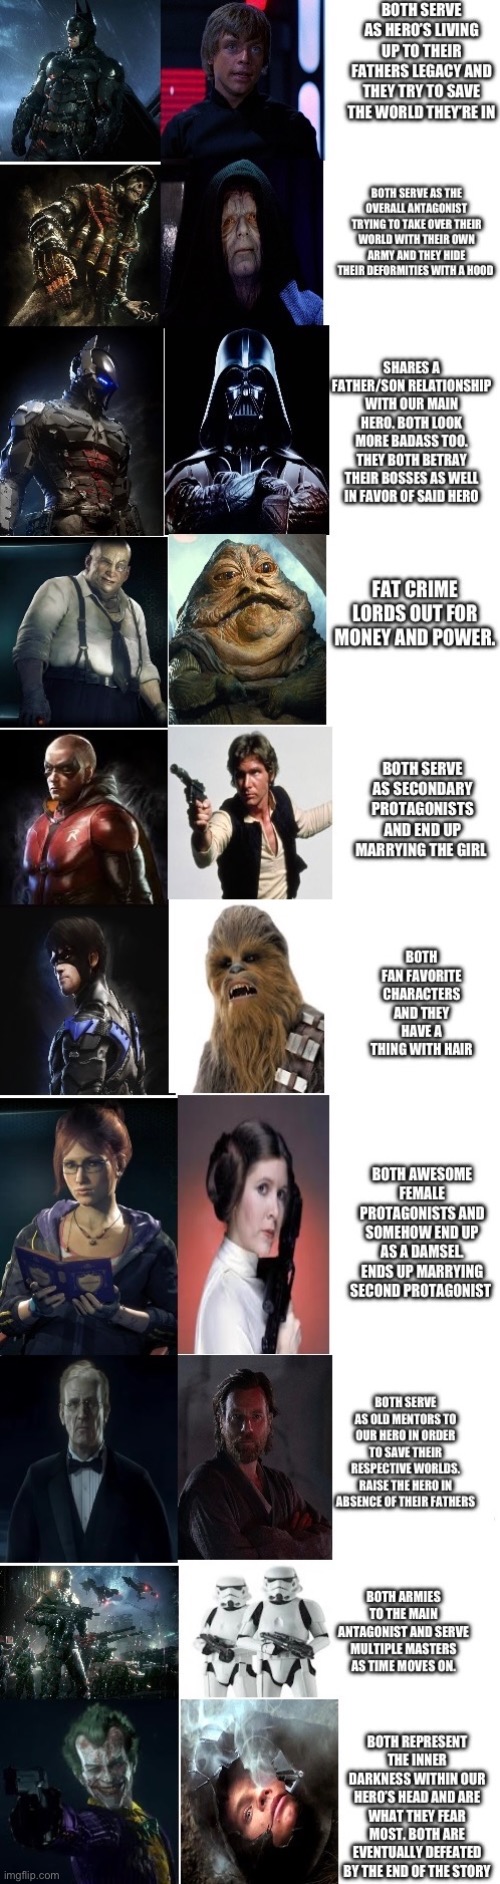 BUT HEY THATS JUST A THEORY | image tagged in meme,conspiracy,star wars,batman | made w/ Imgflip meme maker